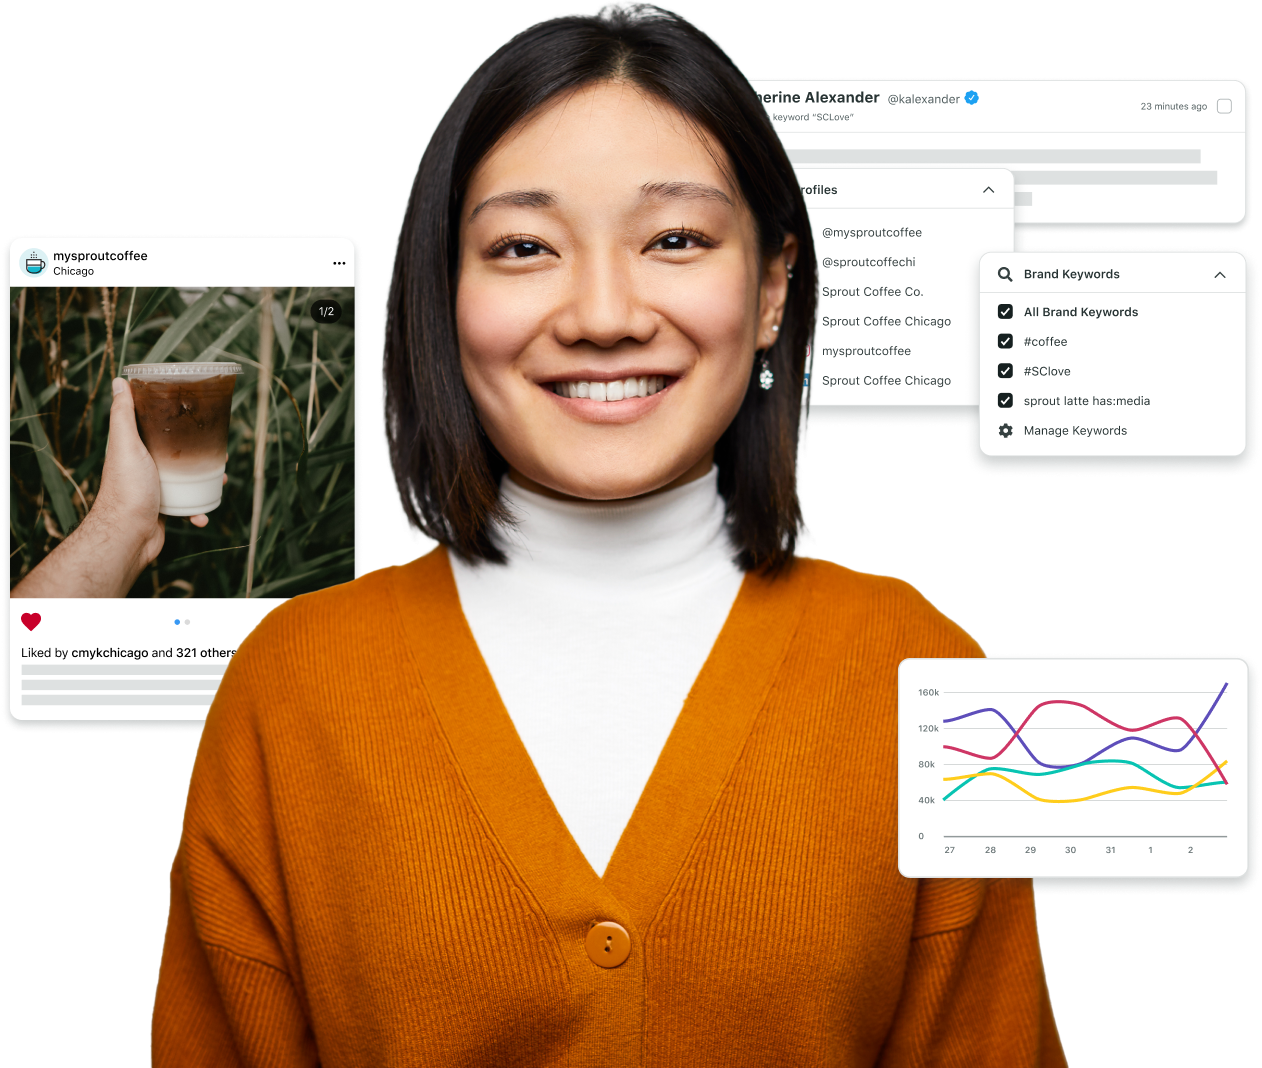 A smiling Sprout user shown with snapshots of the Sprout platform representing the full scope of social management capabilities.